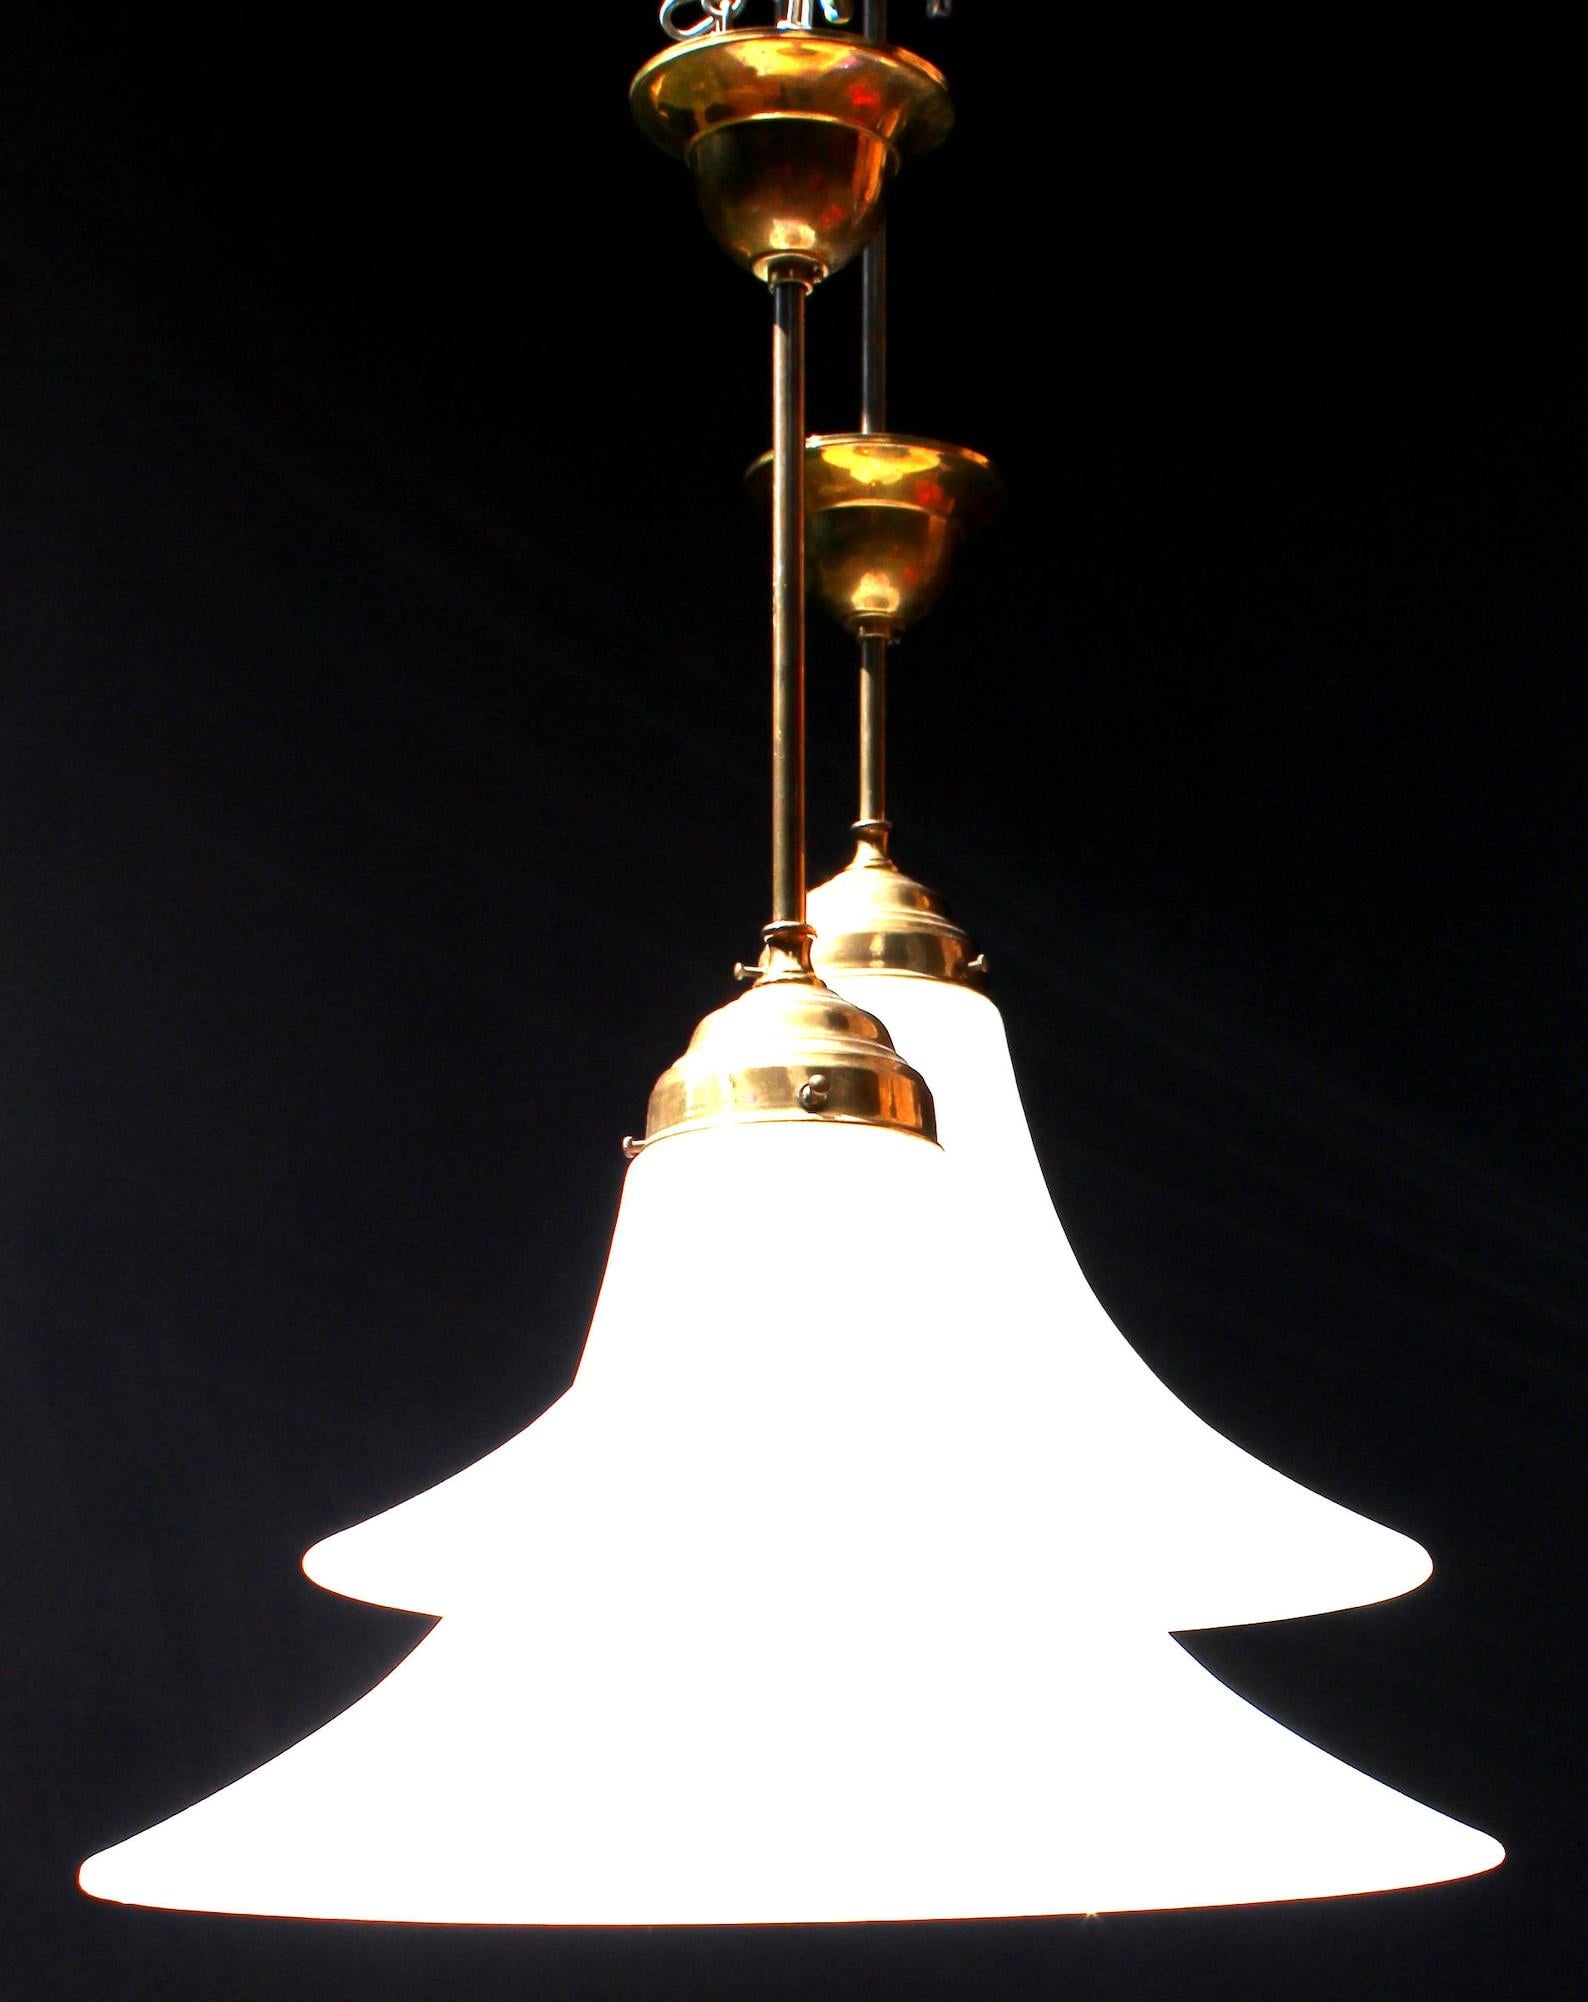 One of Two 1920s Repilica Pairs of Tulip Pendant Light Ceiling Lamp, Germany In Good Condition For Sale In Berlin, BE